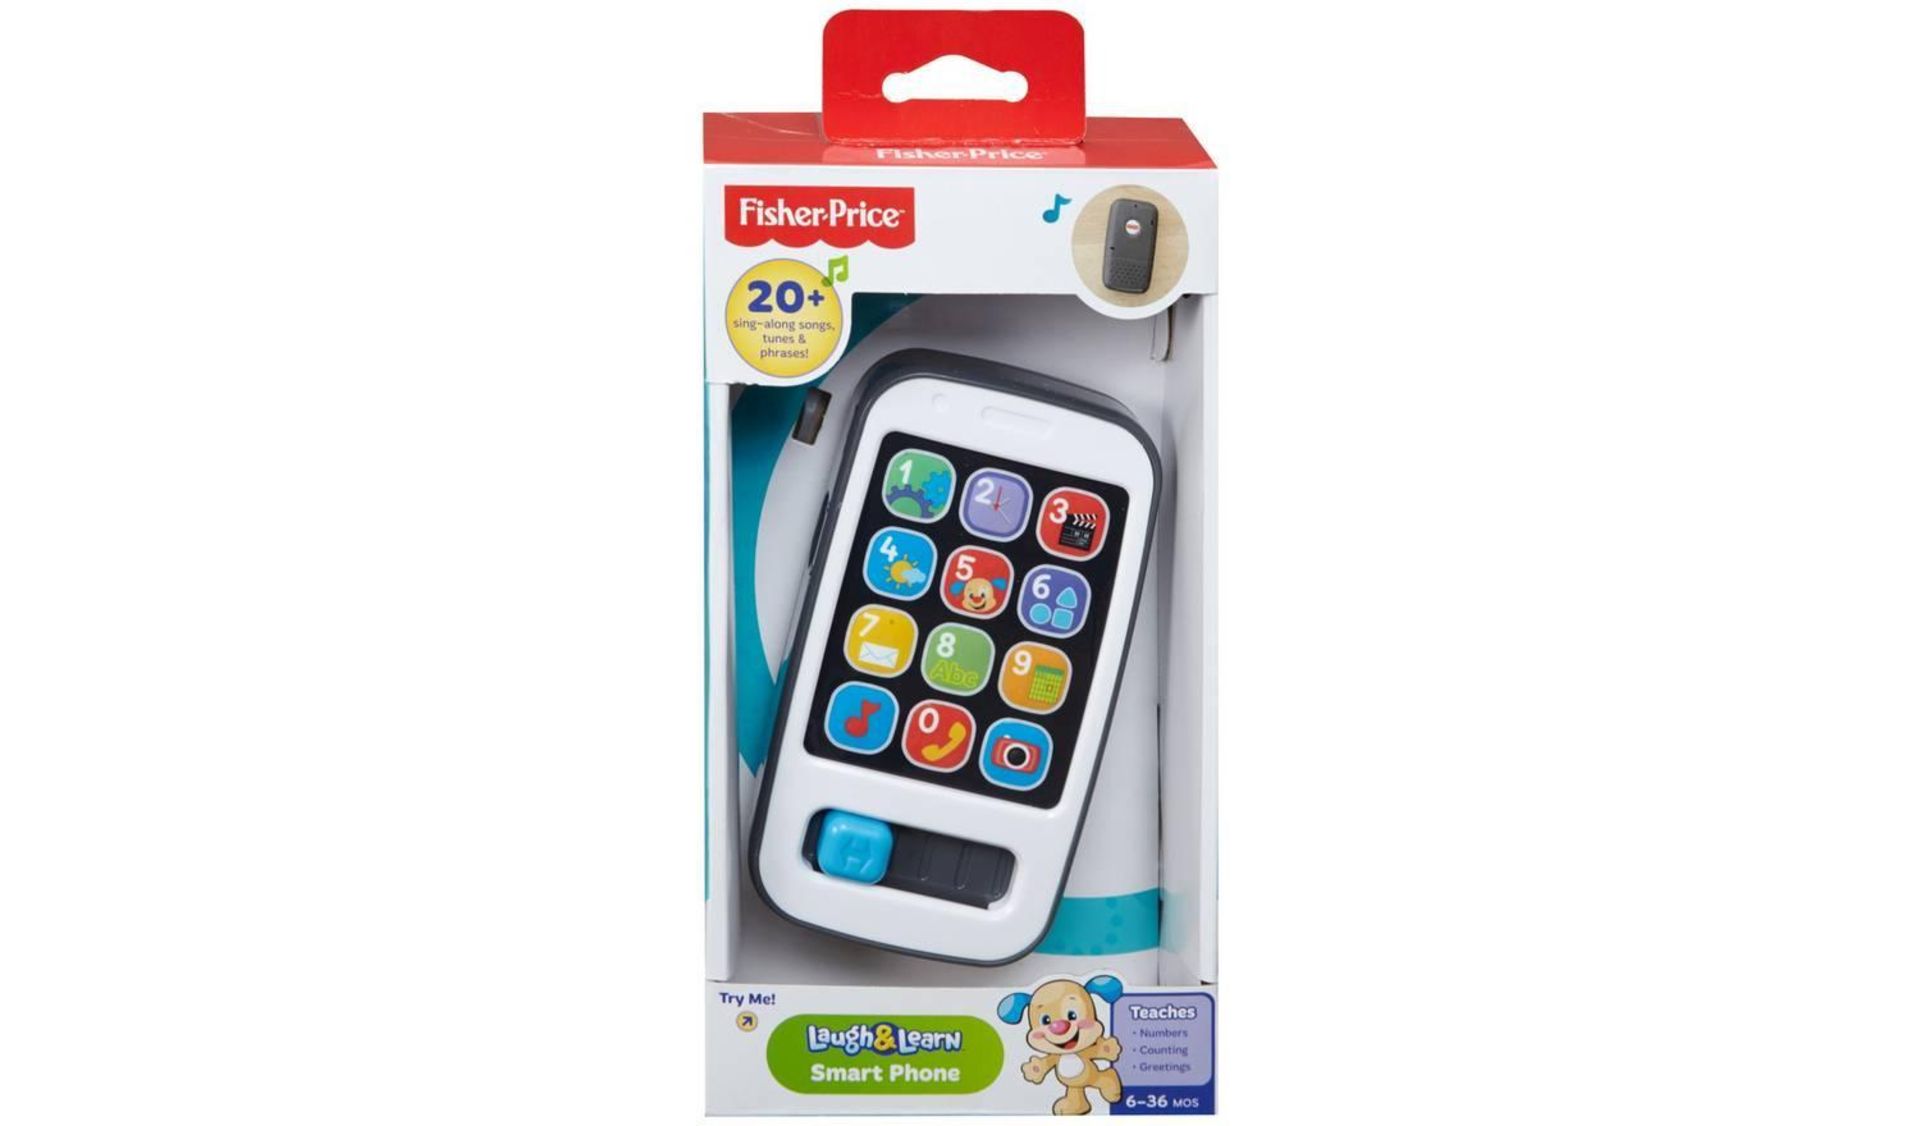 Fisher-Price Laugh & Learn Smart Phone, £11.00 RRP